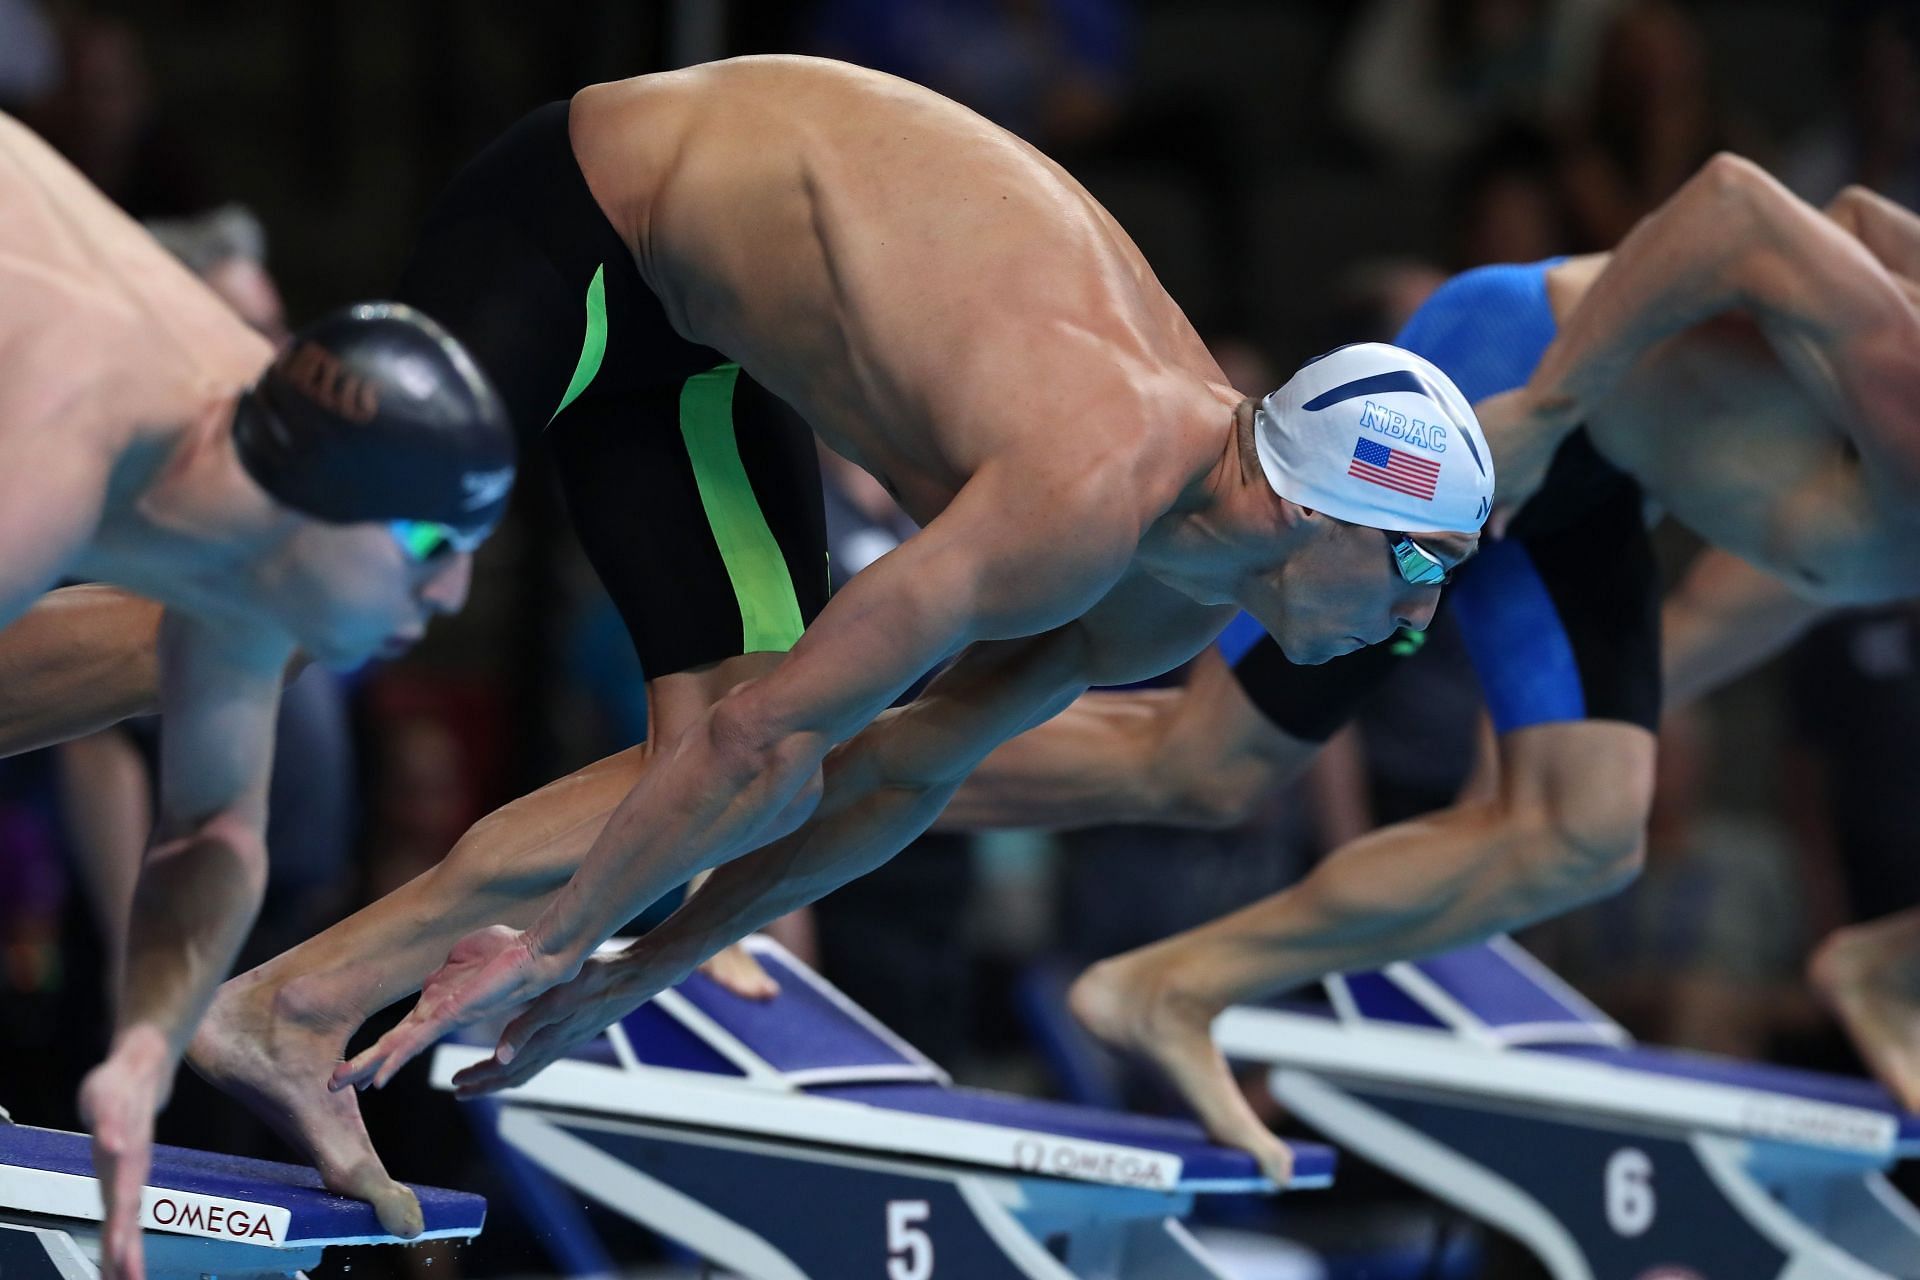 Michael Phelps at the 2016 U.S. Olympic Team Swimming Trials - Day 6 (Image via Tom Pennington/Getty Images)